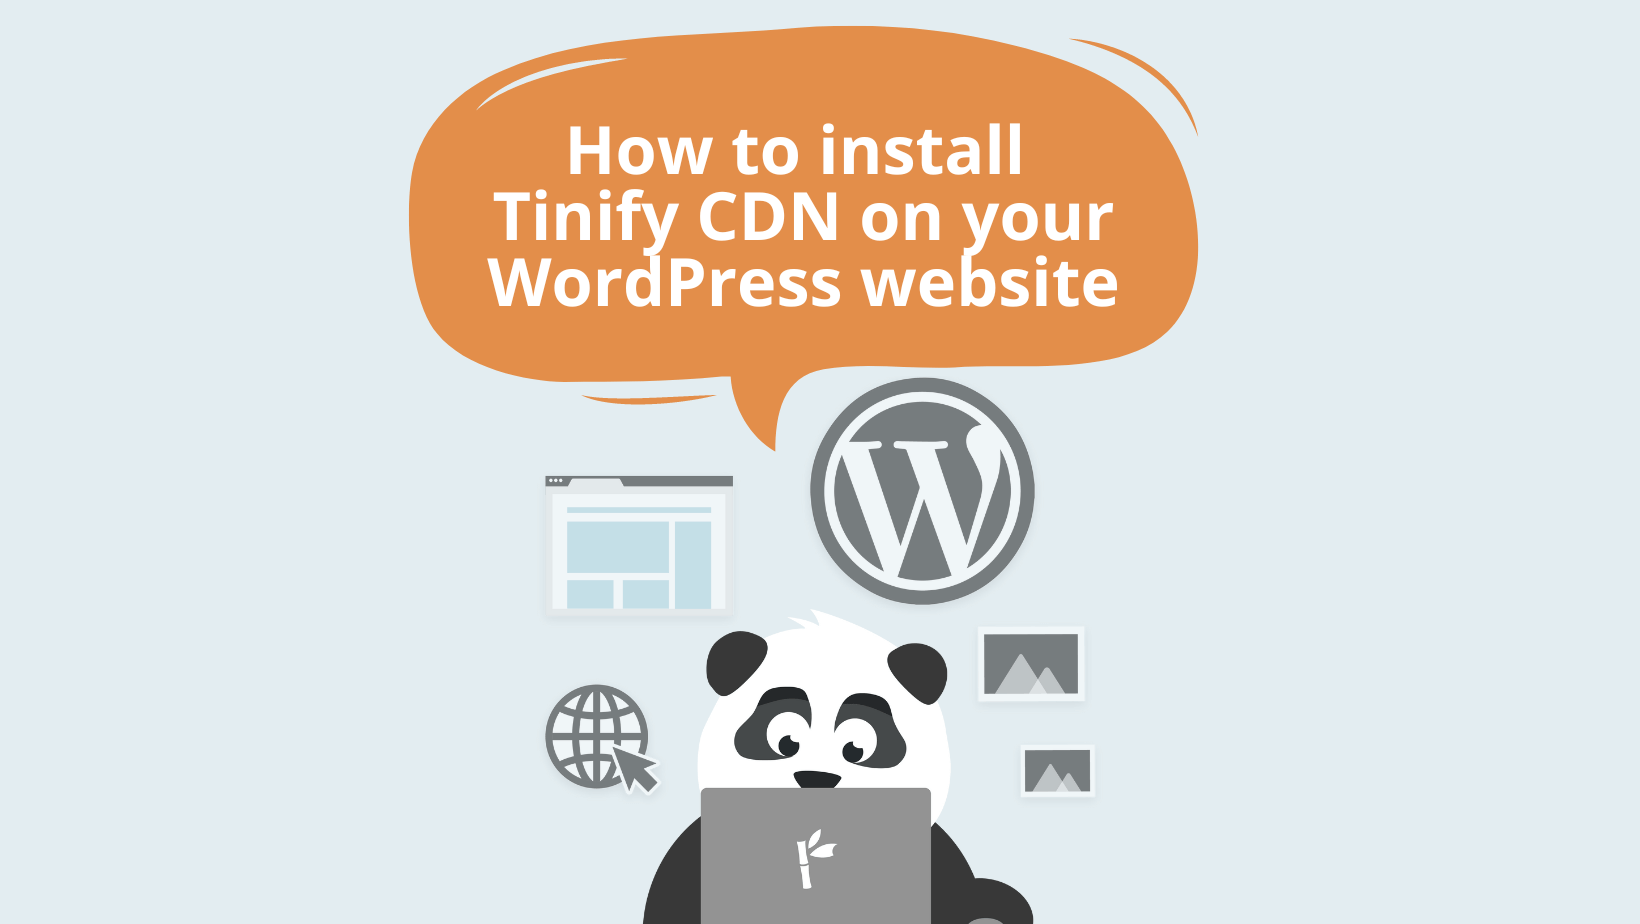 How to install Tinify CDN on your WordPress website